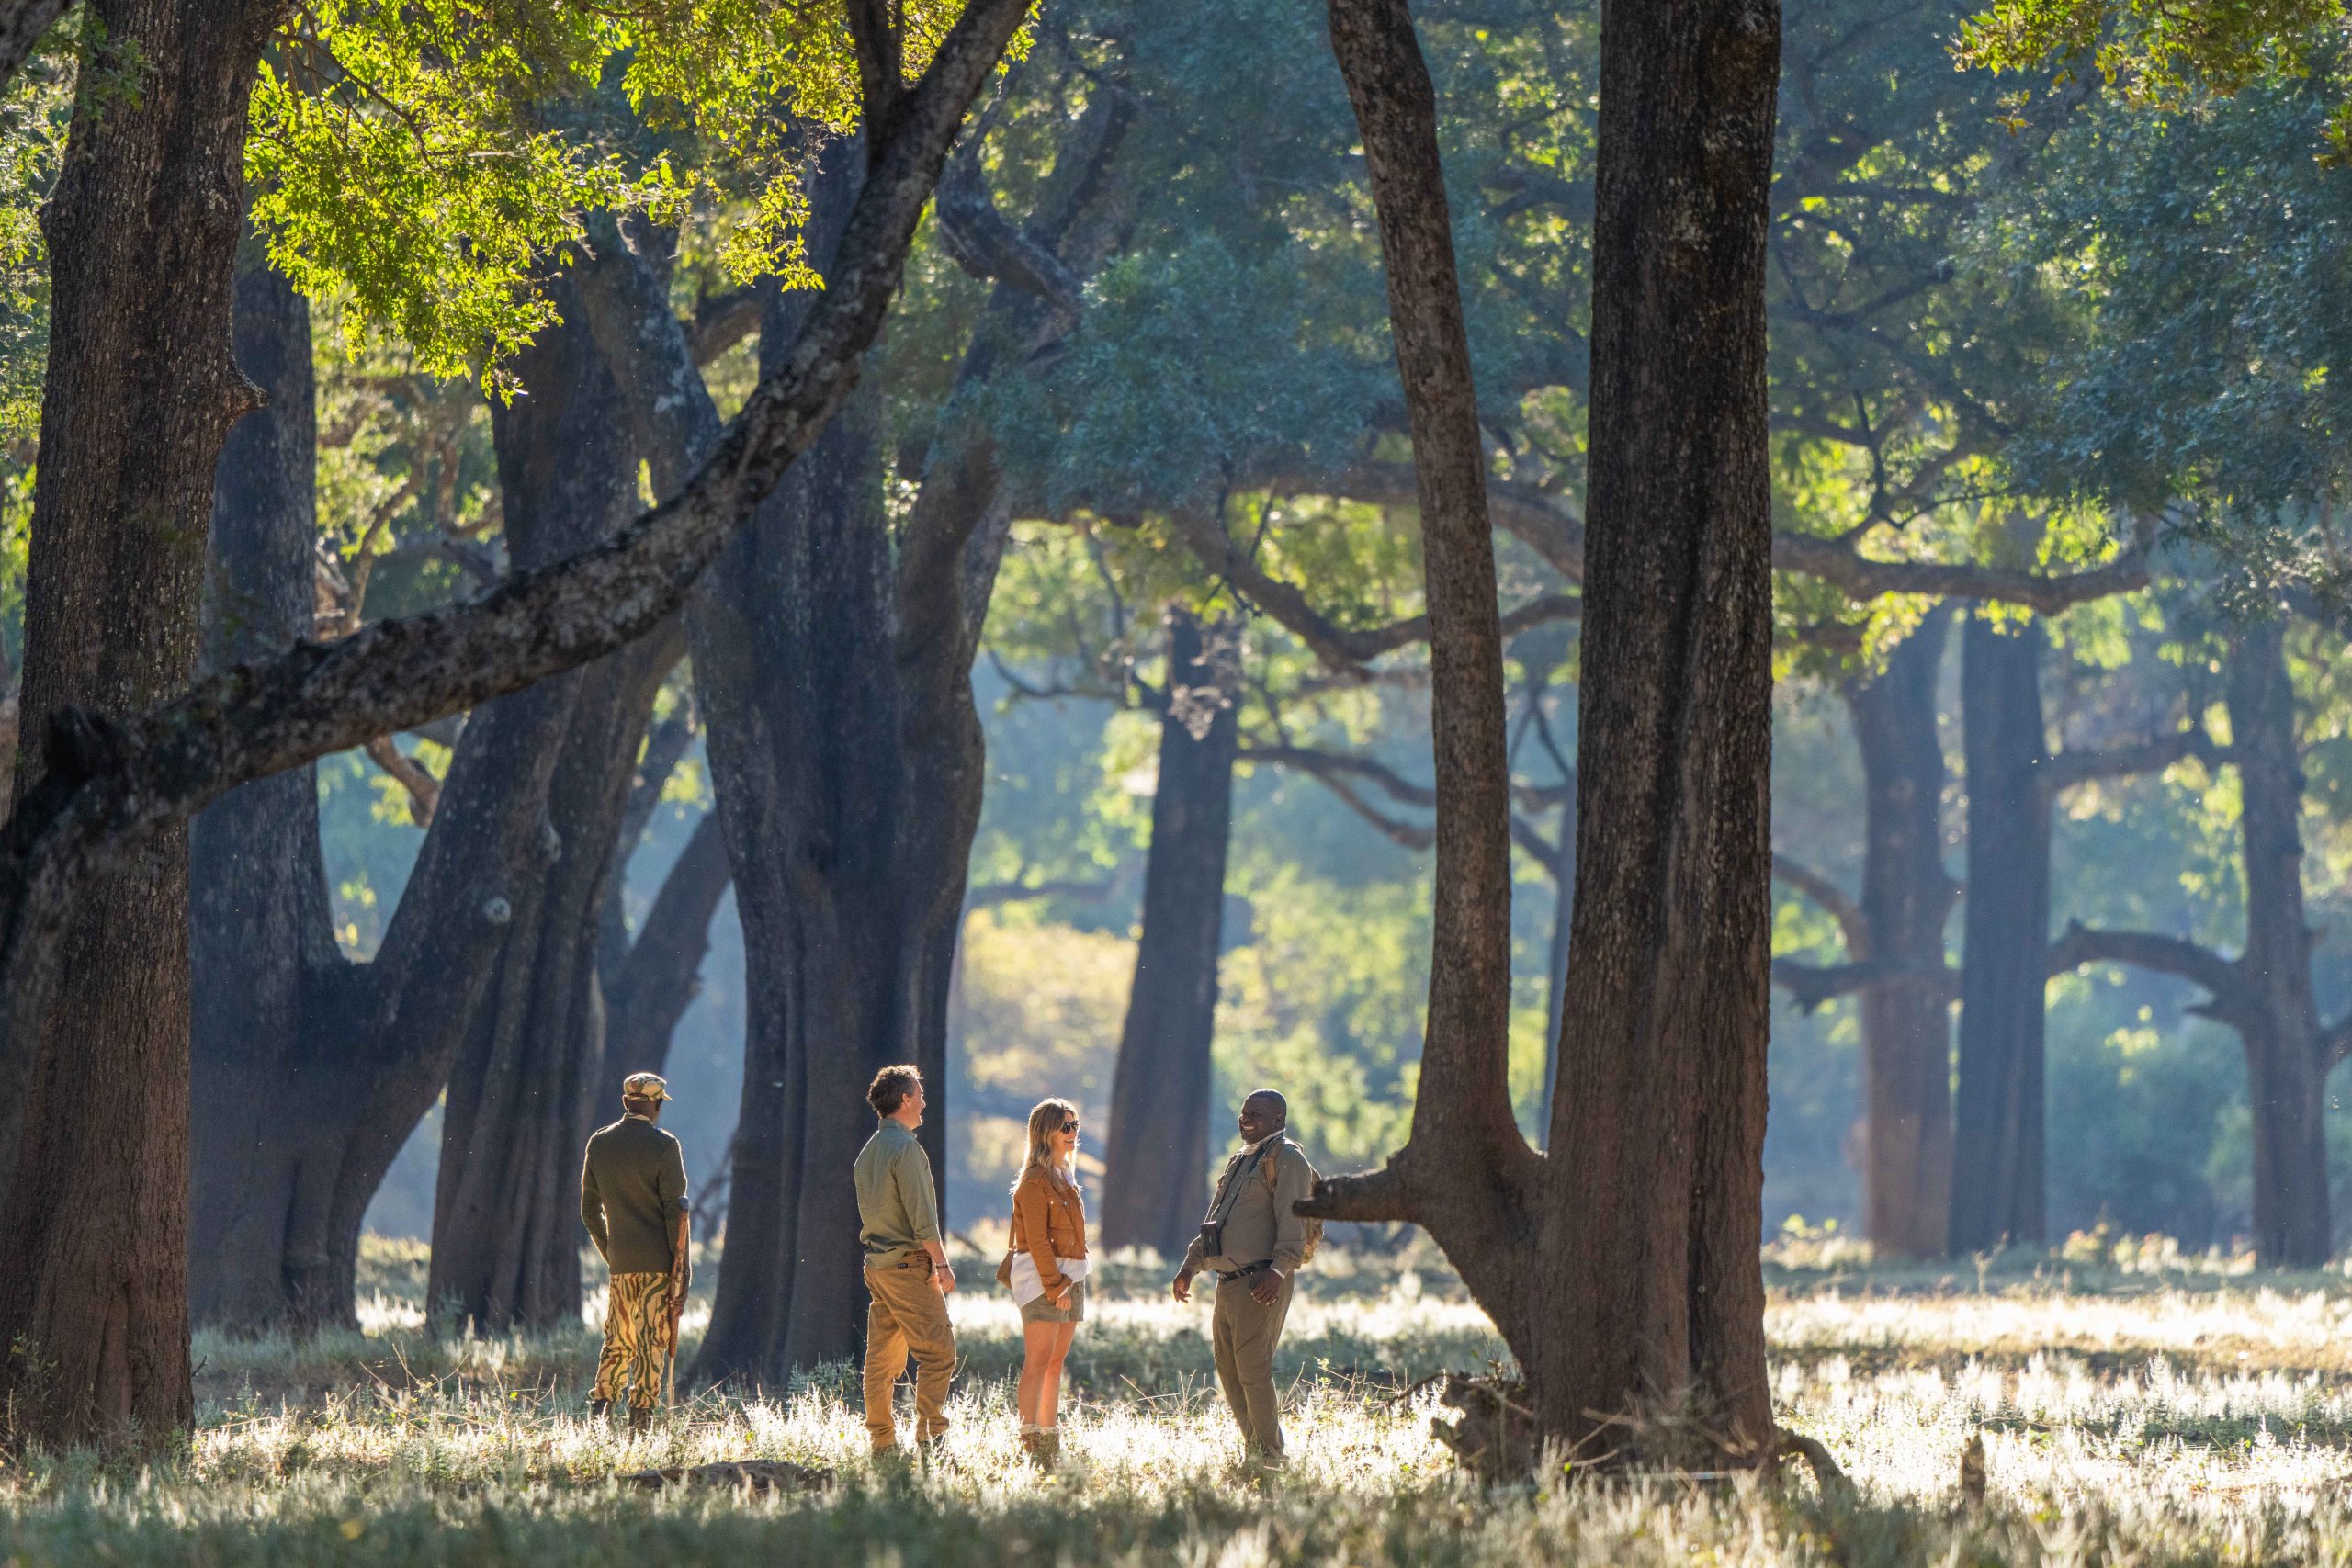 A Walk On The Wild Side In Zambia’s South Luangwa National Park